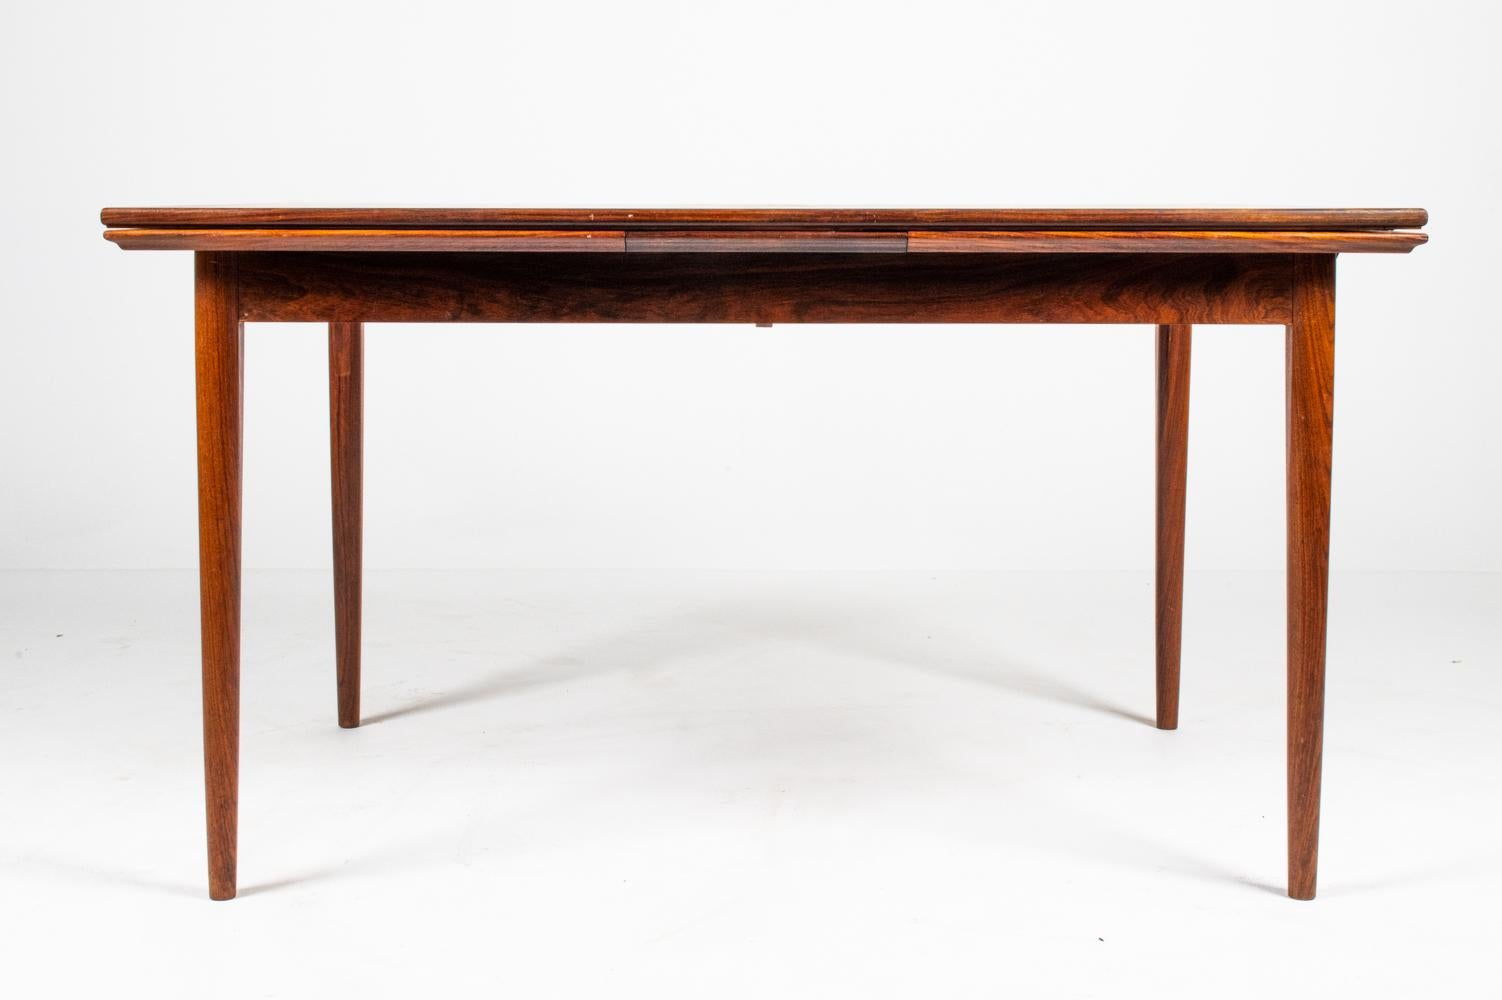 Danish Mid-Century Rosewood Extension Dining Table, c. 1960's In Good Condition For Sale In Norwalk, CT